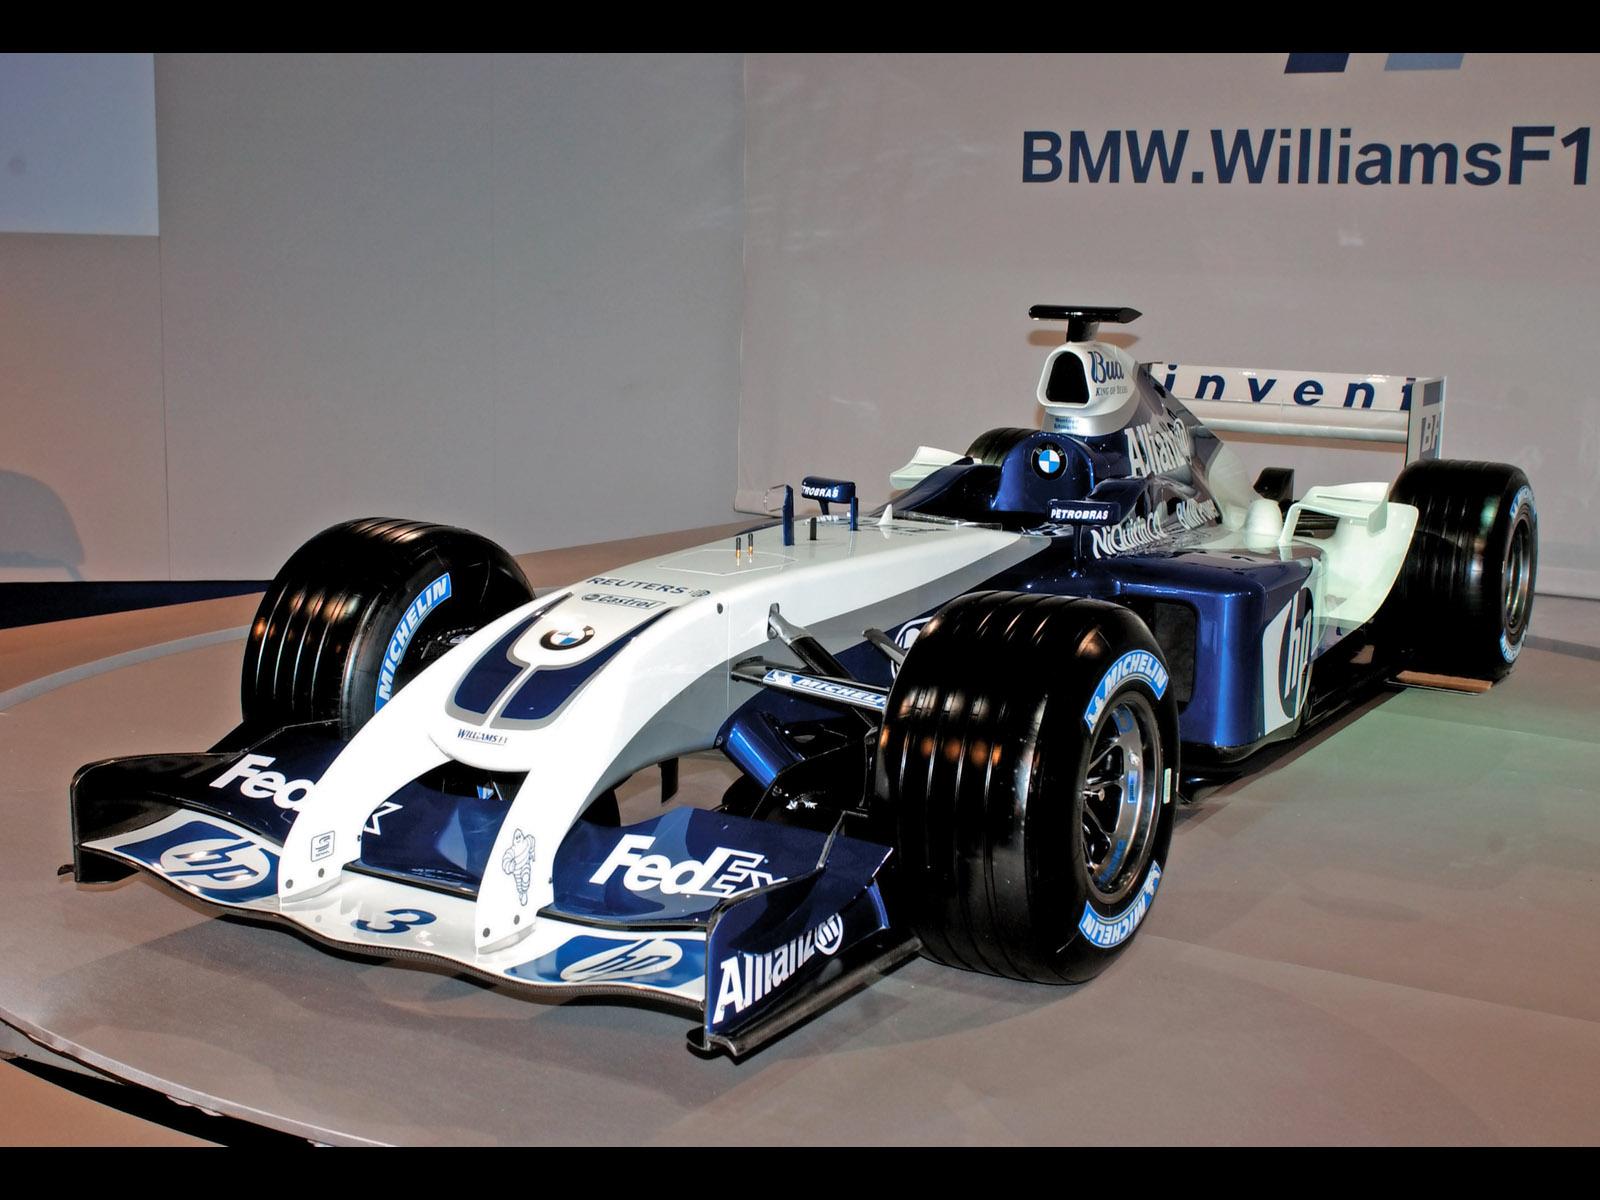 BMW Williams F1 FW26 picture. BMW Williams photo gallery